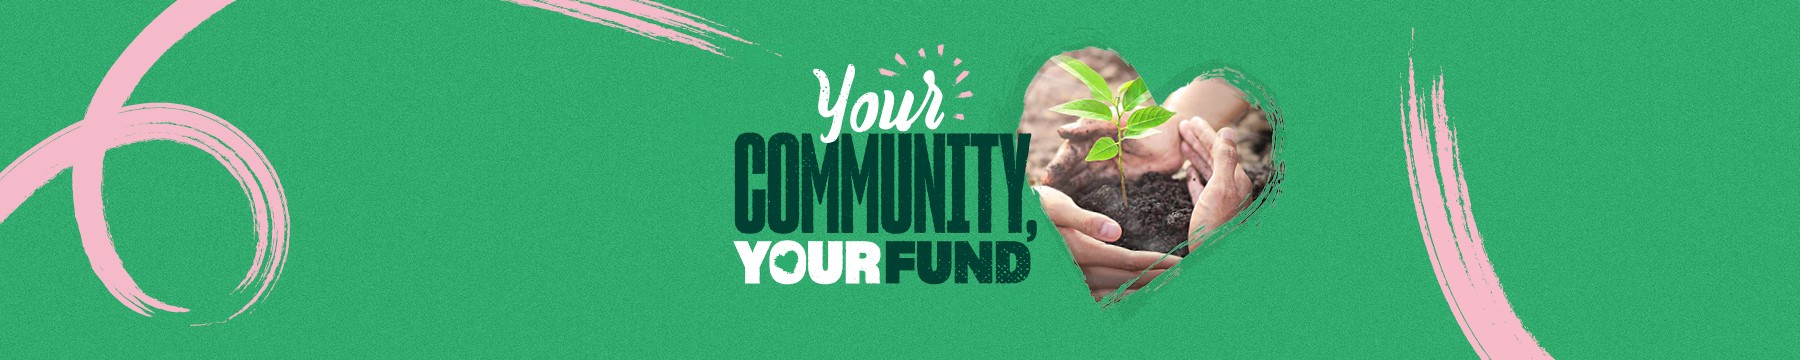 Your community, your fund inner website banner.